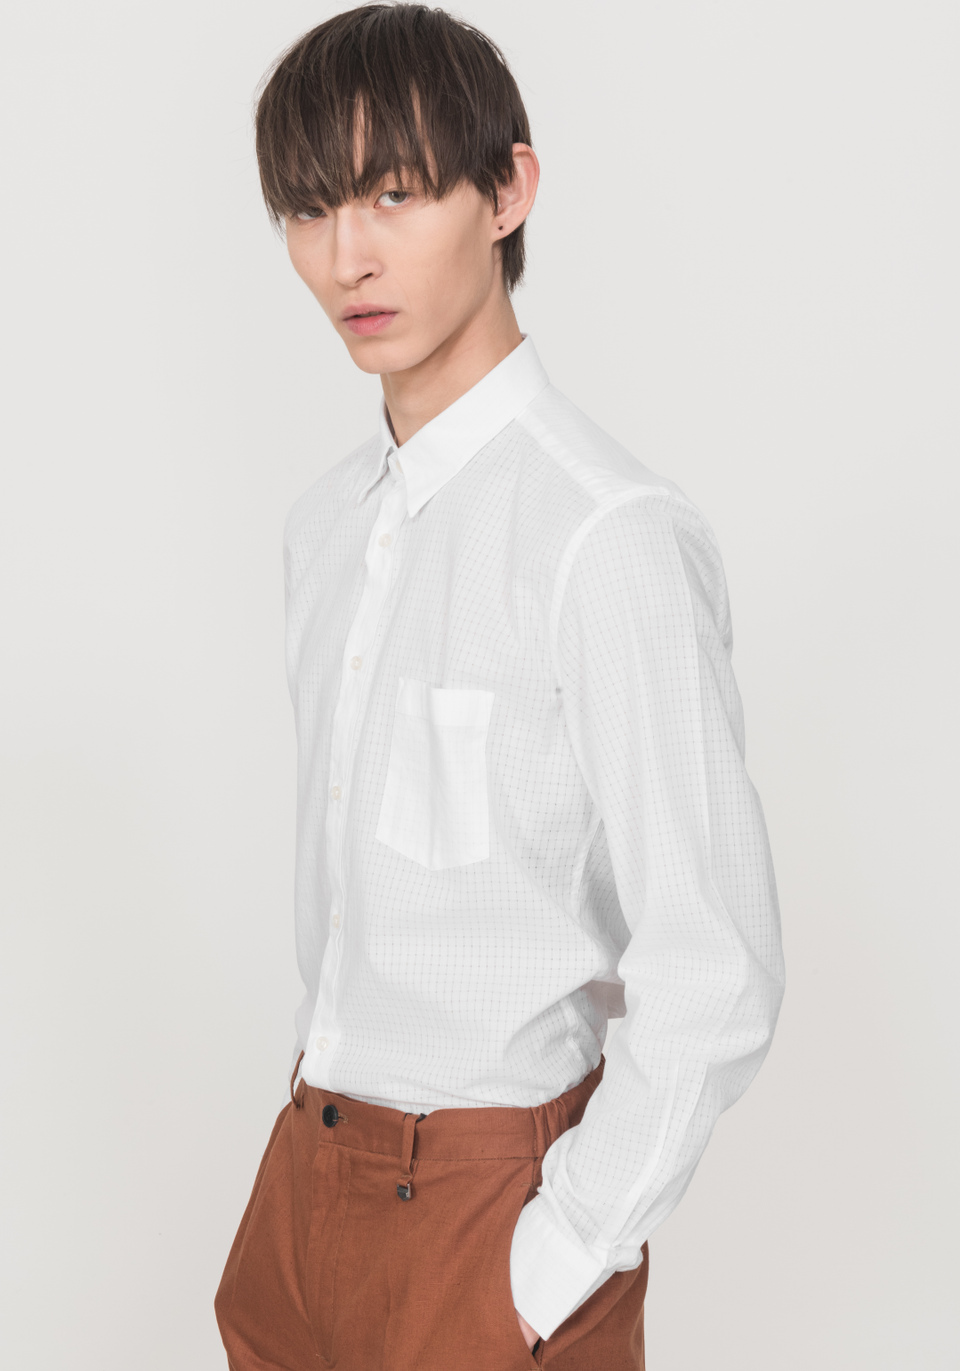 SLIM-FIT SHIRT IN SOFT CHECKED COTTON - Antony Morato Online Shop